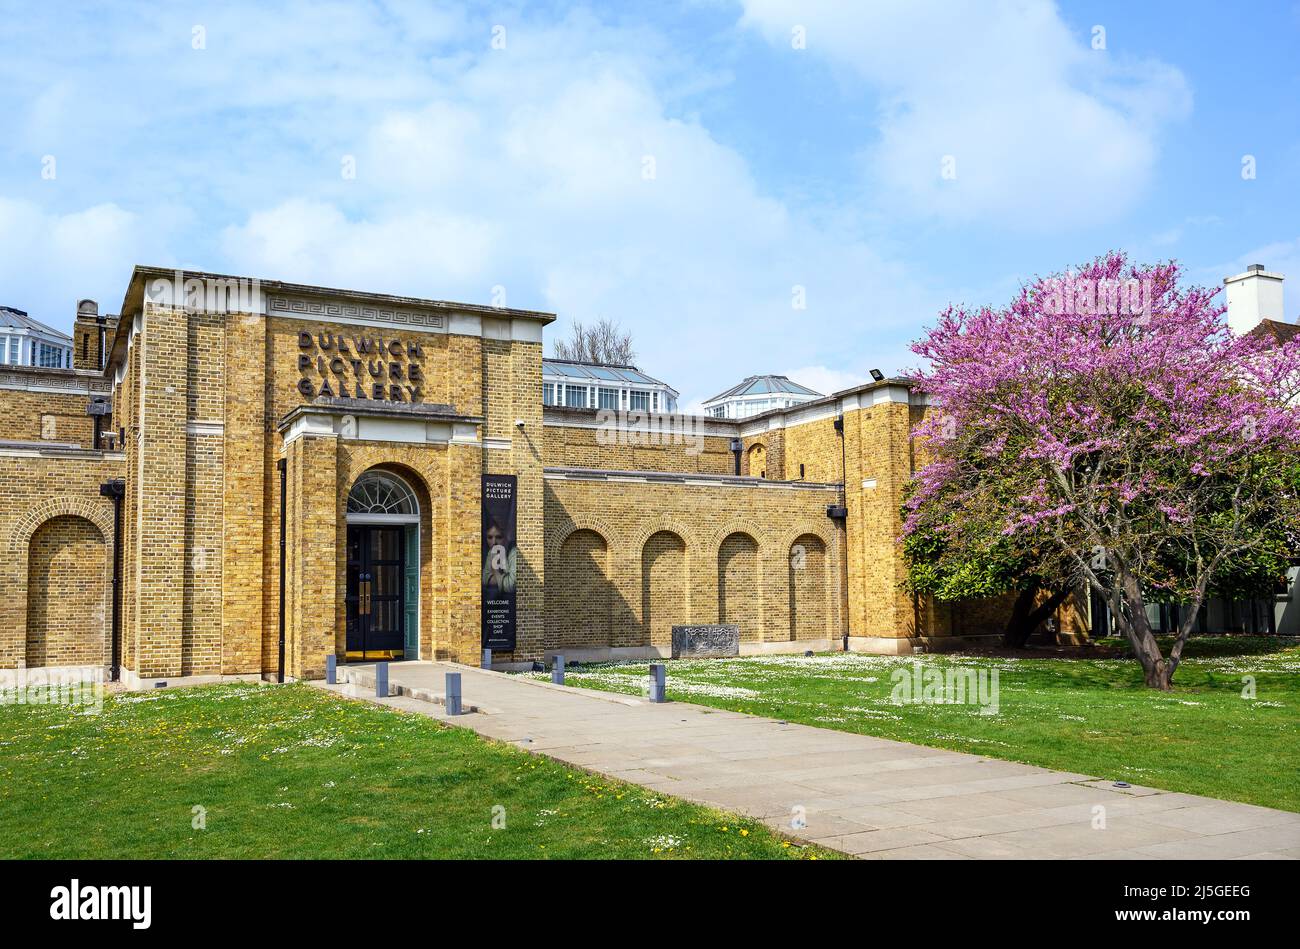 Dulwich Village, London, UK: Dulwich Picture Gallery in Dulwich, south London. This is the oldest public art gallery in England. Designed by John Soan Stock Photo